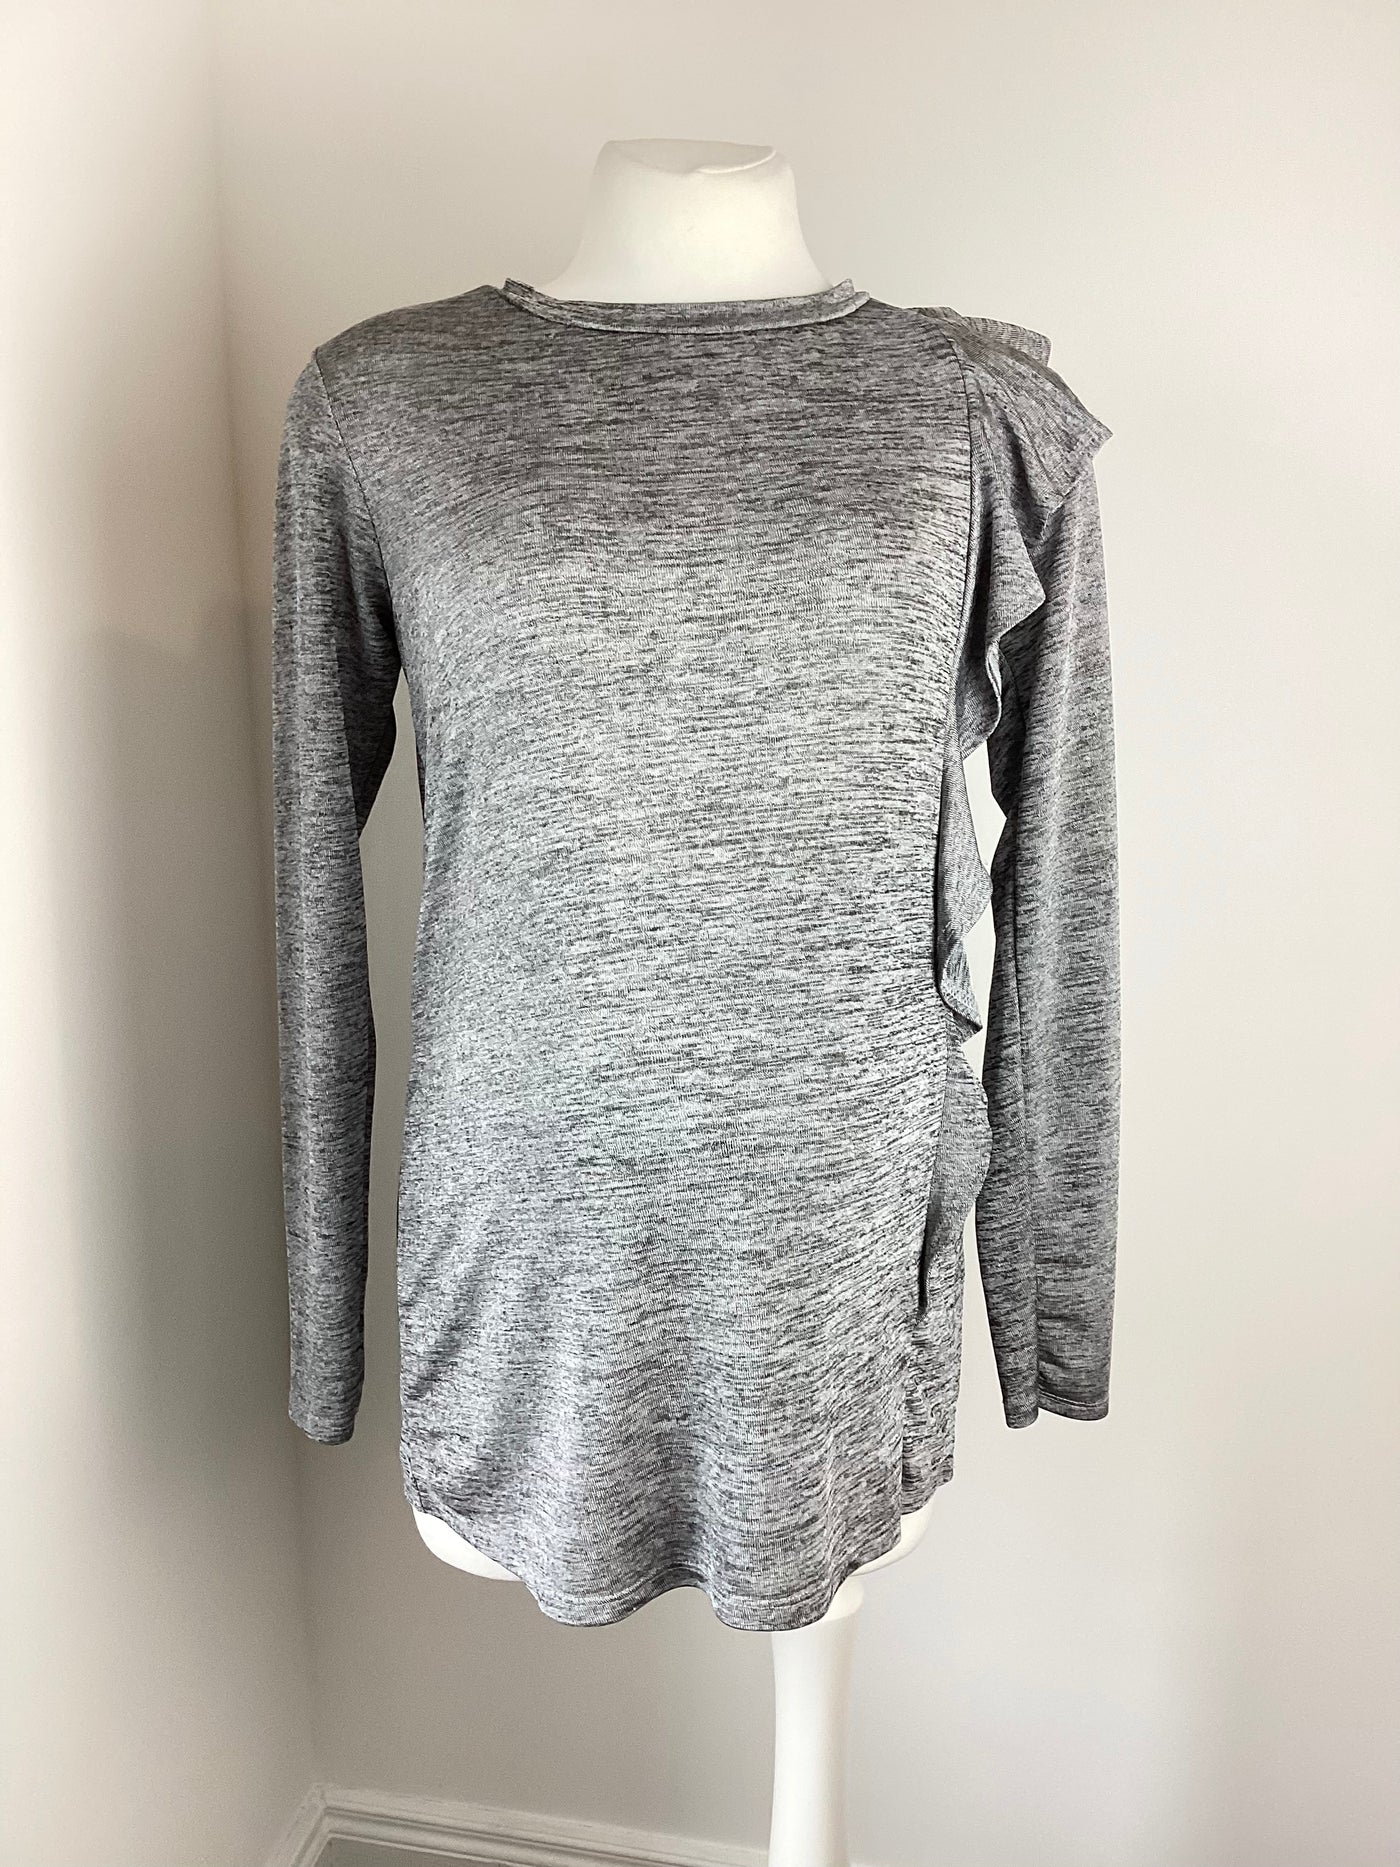 Bluebelle Maternity Grey marl top with front frill - Size 8